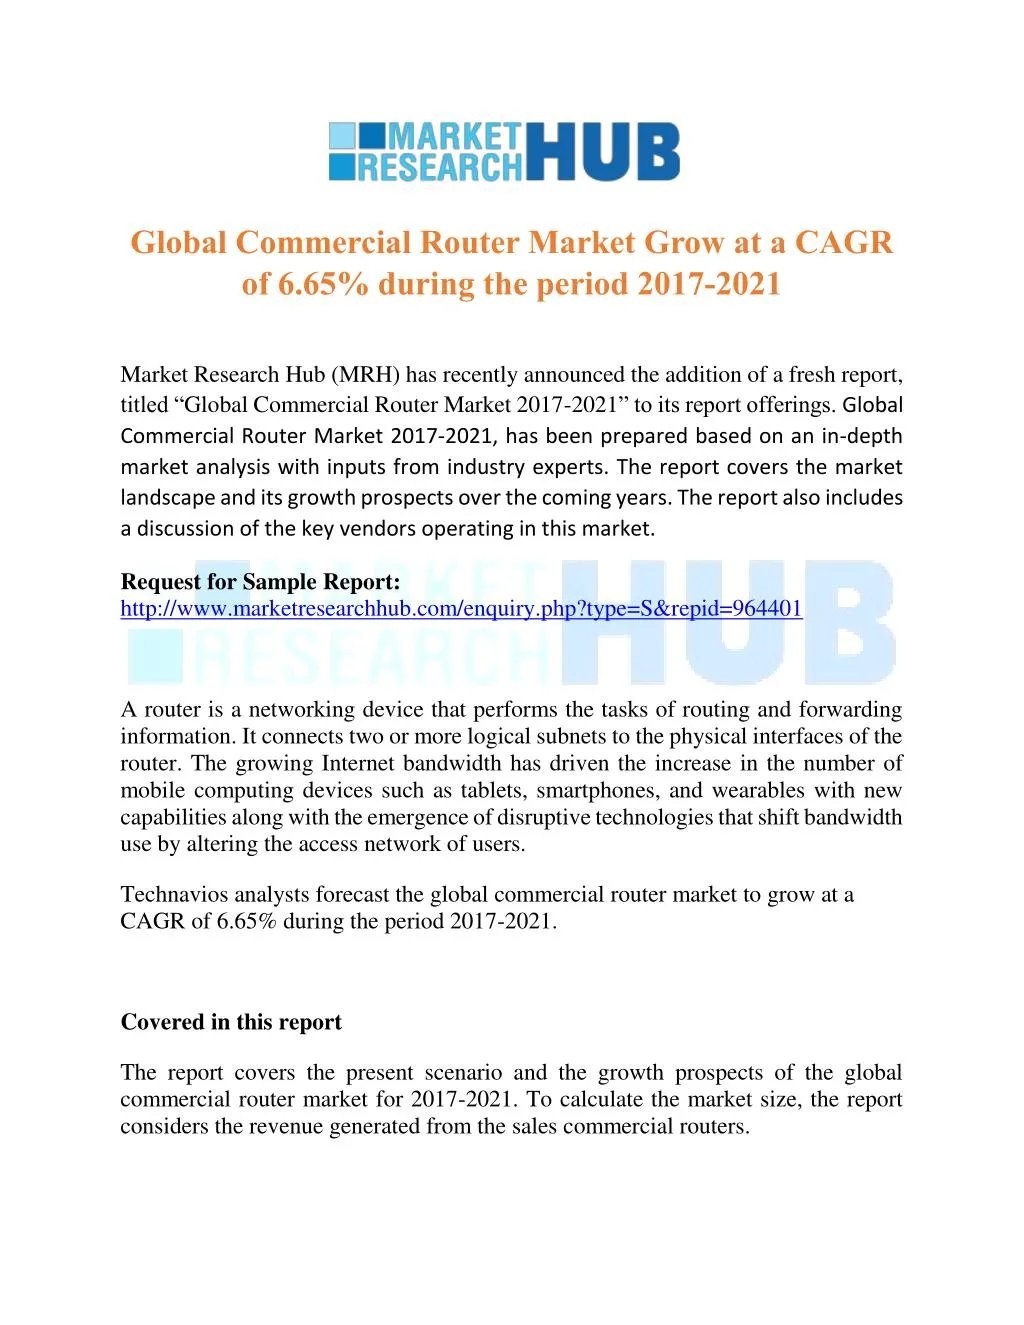 global commercial router market grow at a cagr